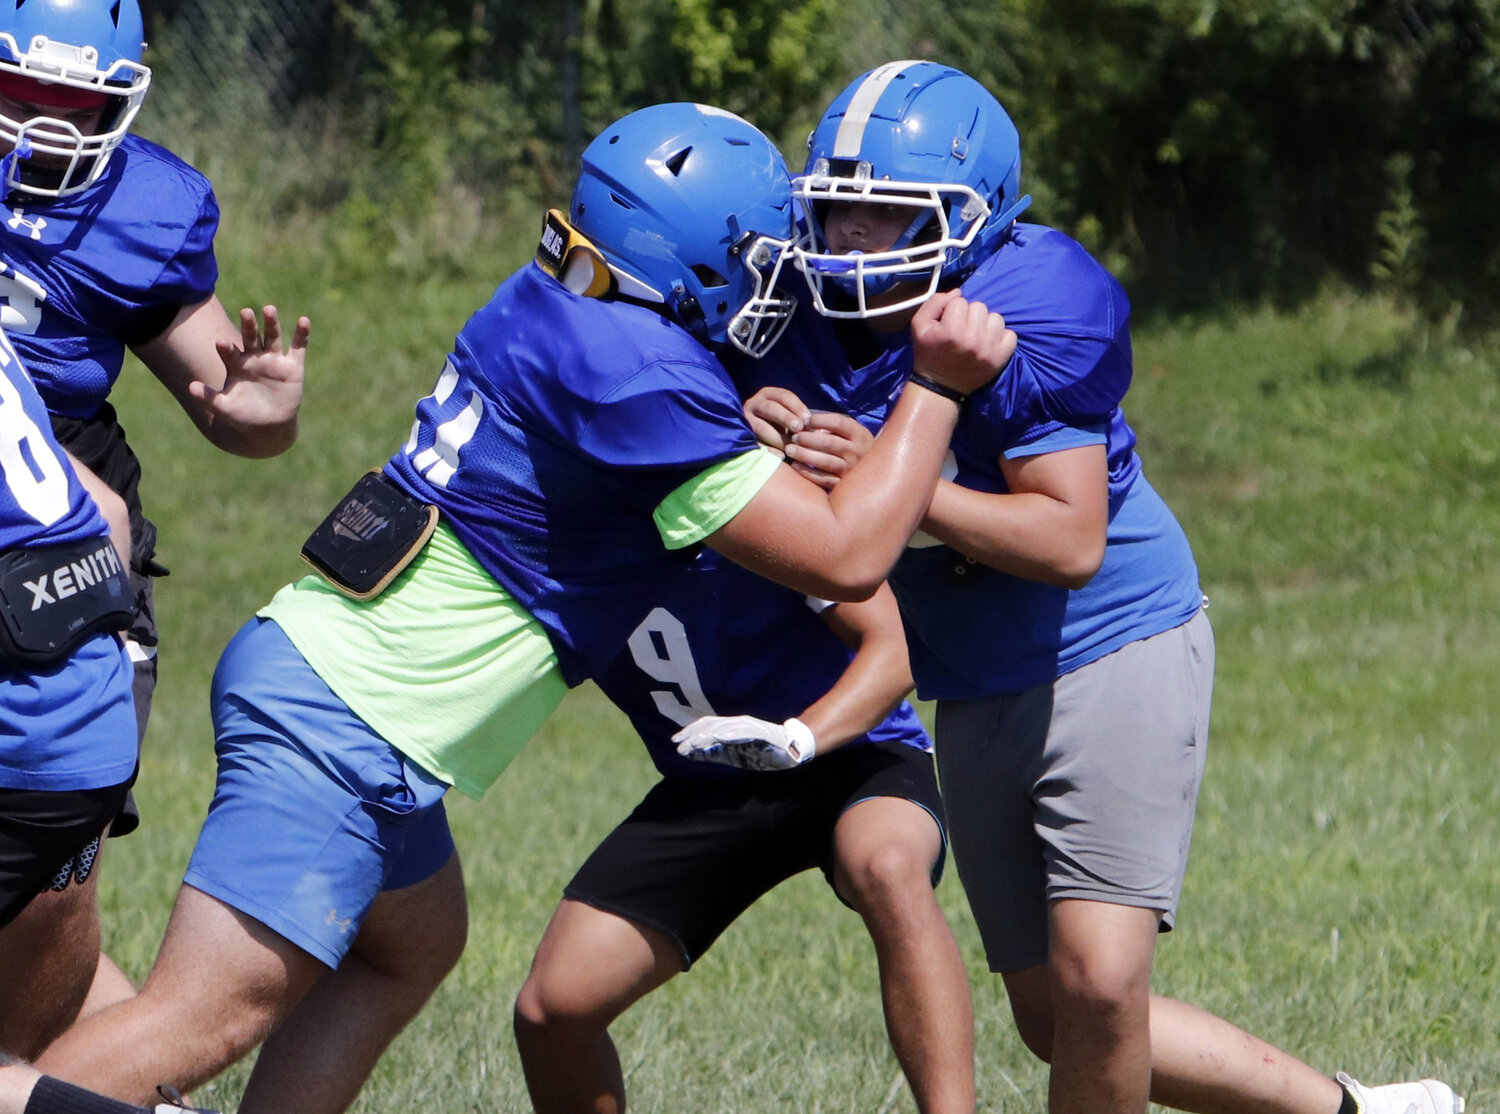 Wright City football players battle in the trenches during an August practice.